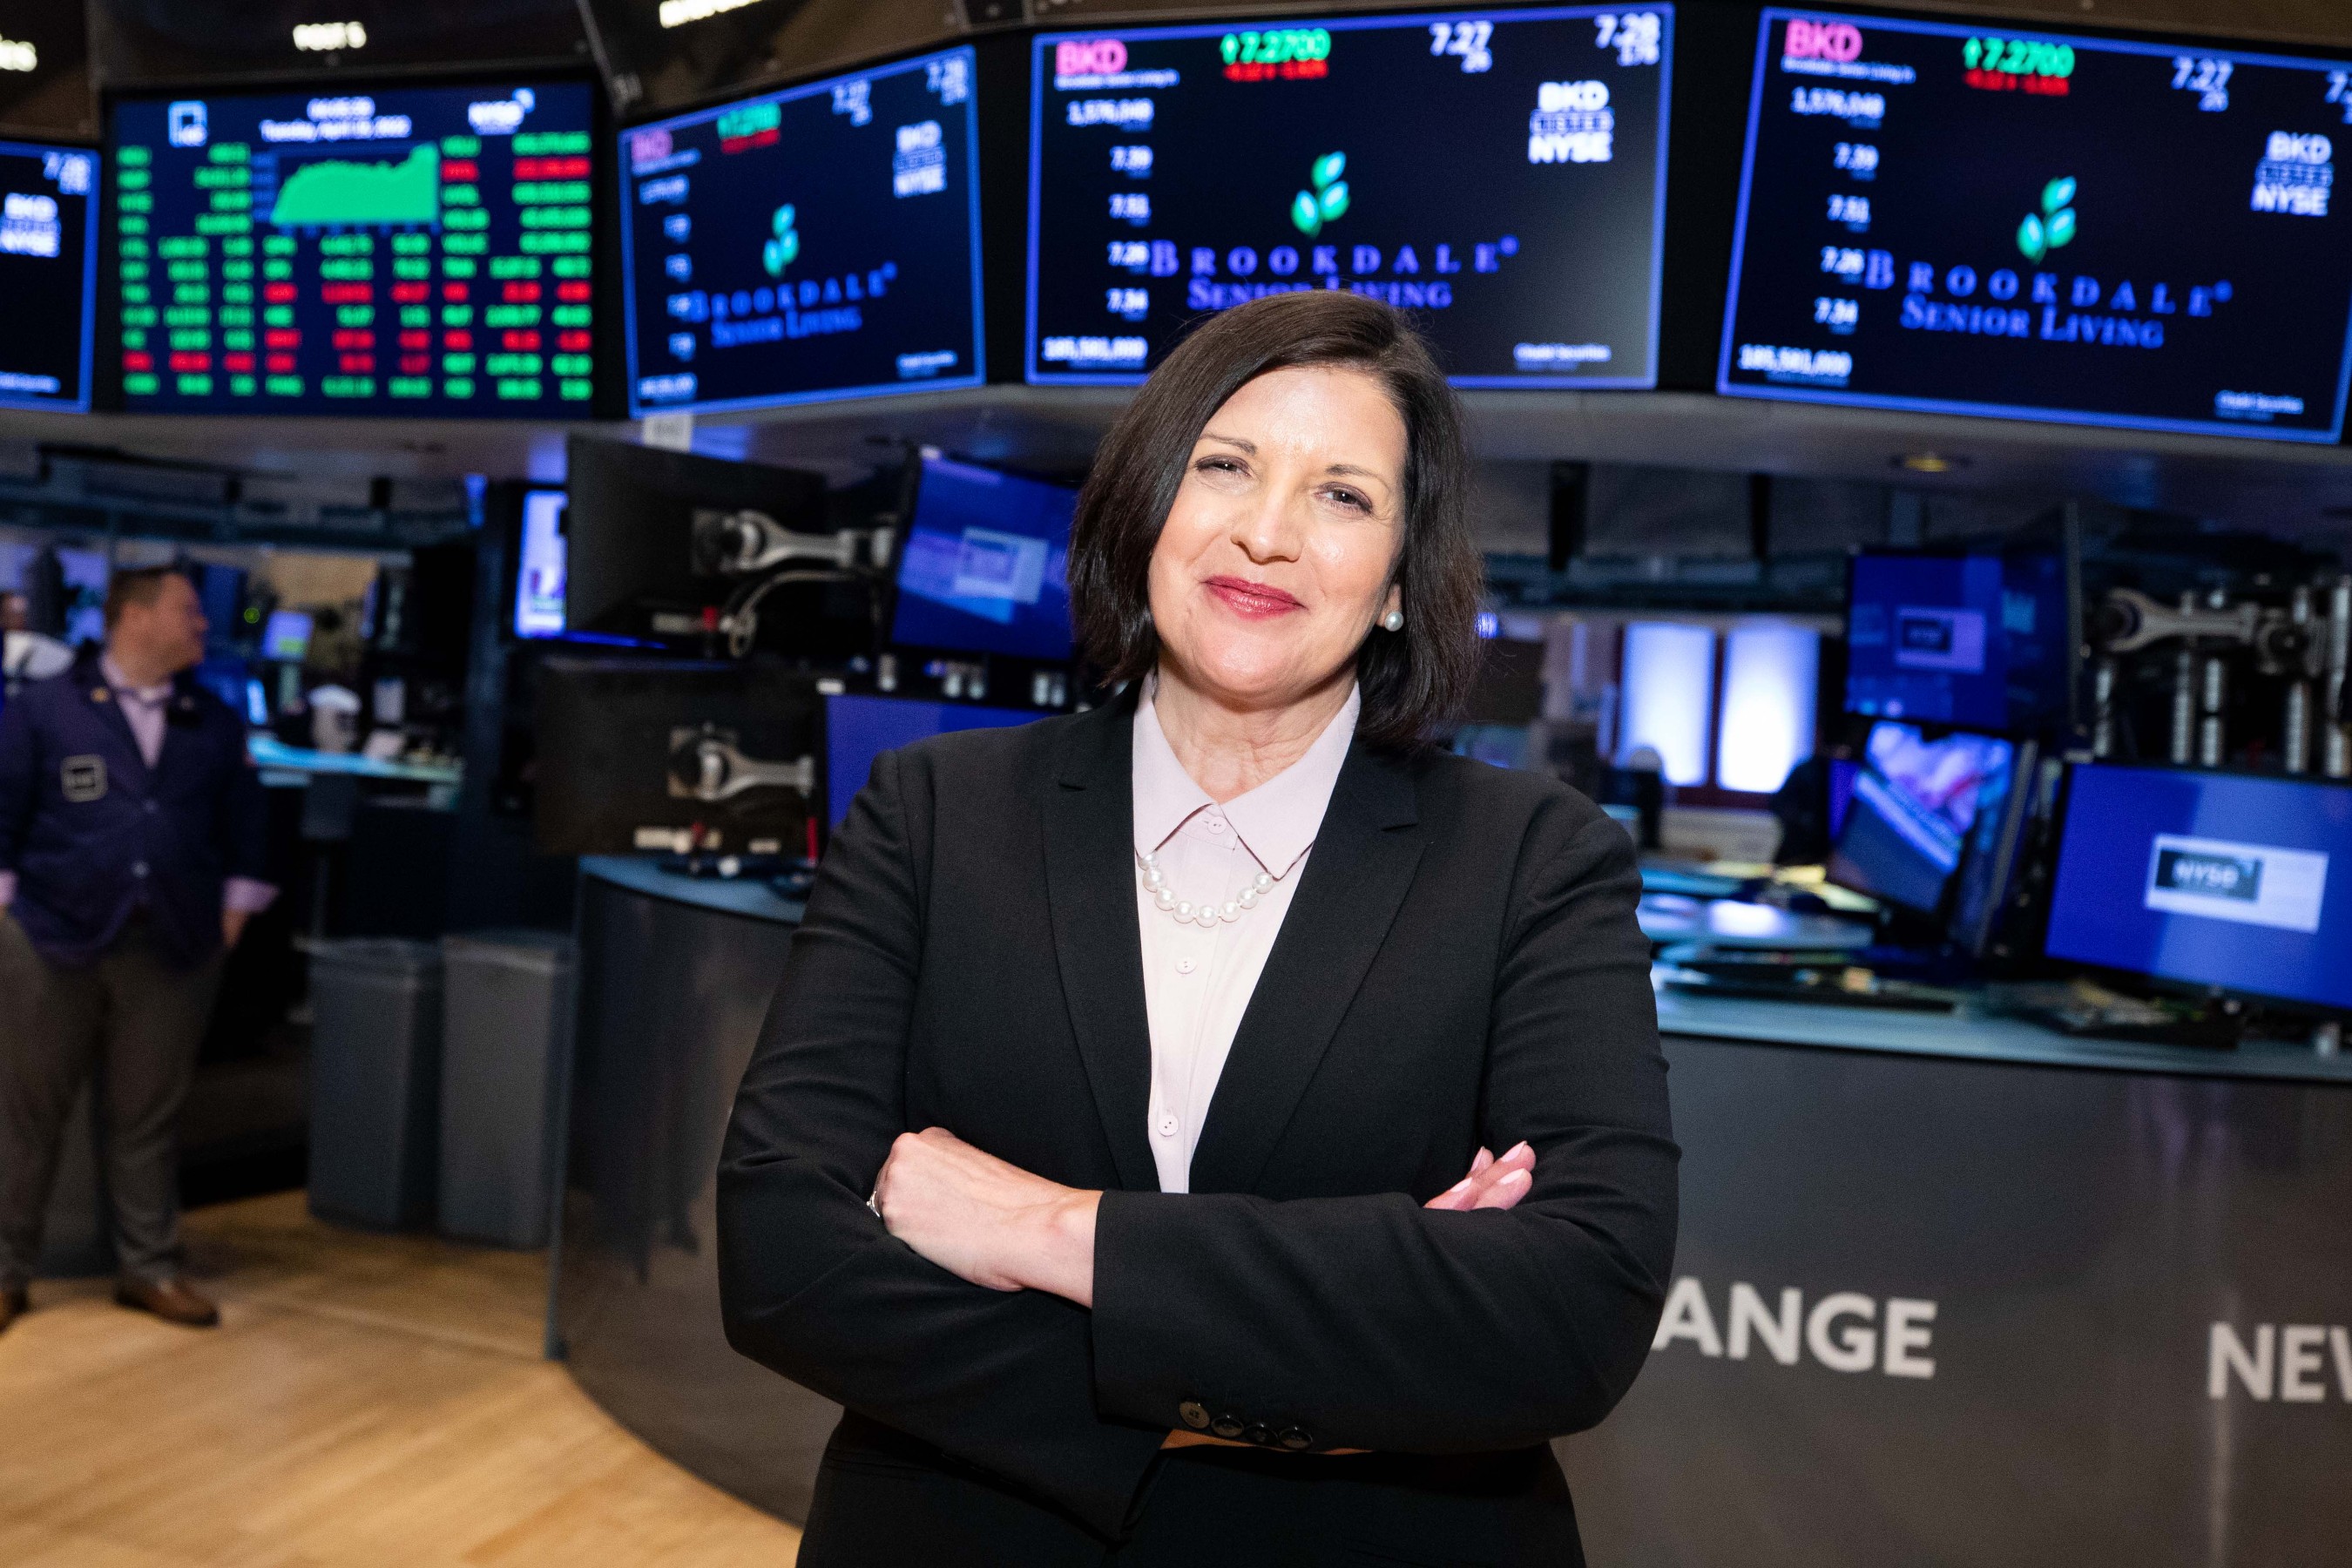 Cindy Baier celebrates book release at NYSE.